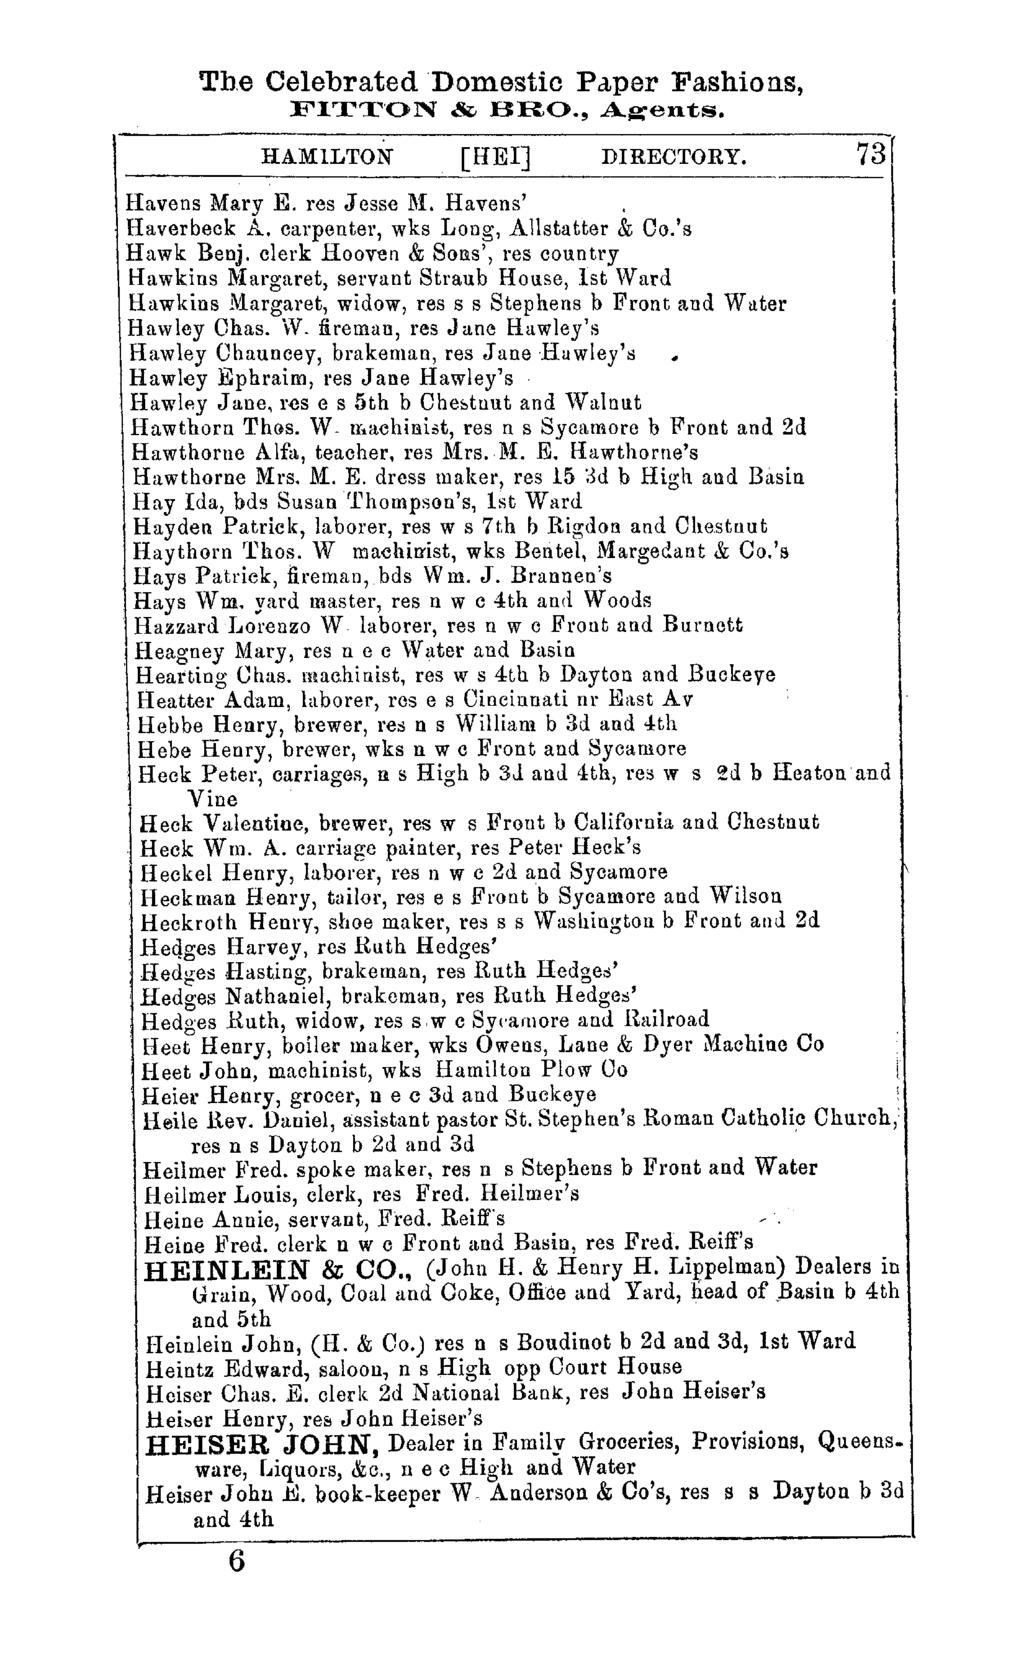 The Celebrated Domestic Pa.per Fashions, FITT'ON &, BRO., A~ents. HAMILTON [HEI] DIRECTORY. Havens Mary E. res Jesse M. Havens'. Haverbeck A. carpenter, wks Long, Allstatter & OO.'s Hawk Benj.